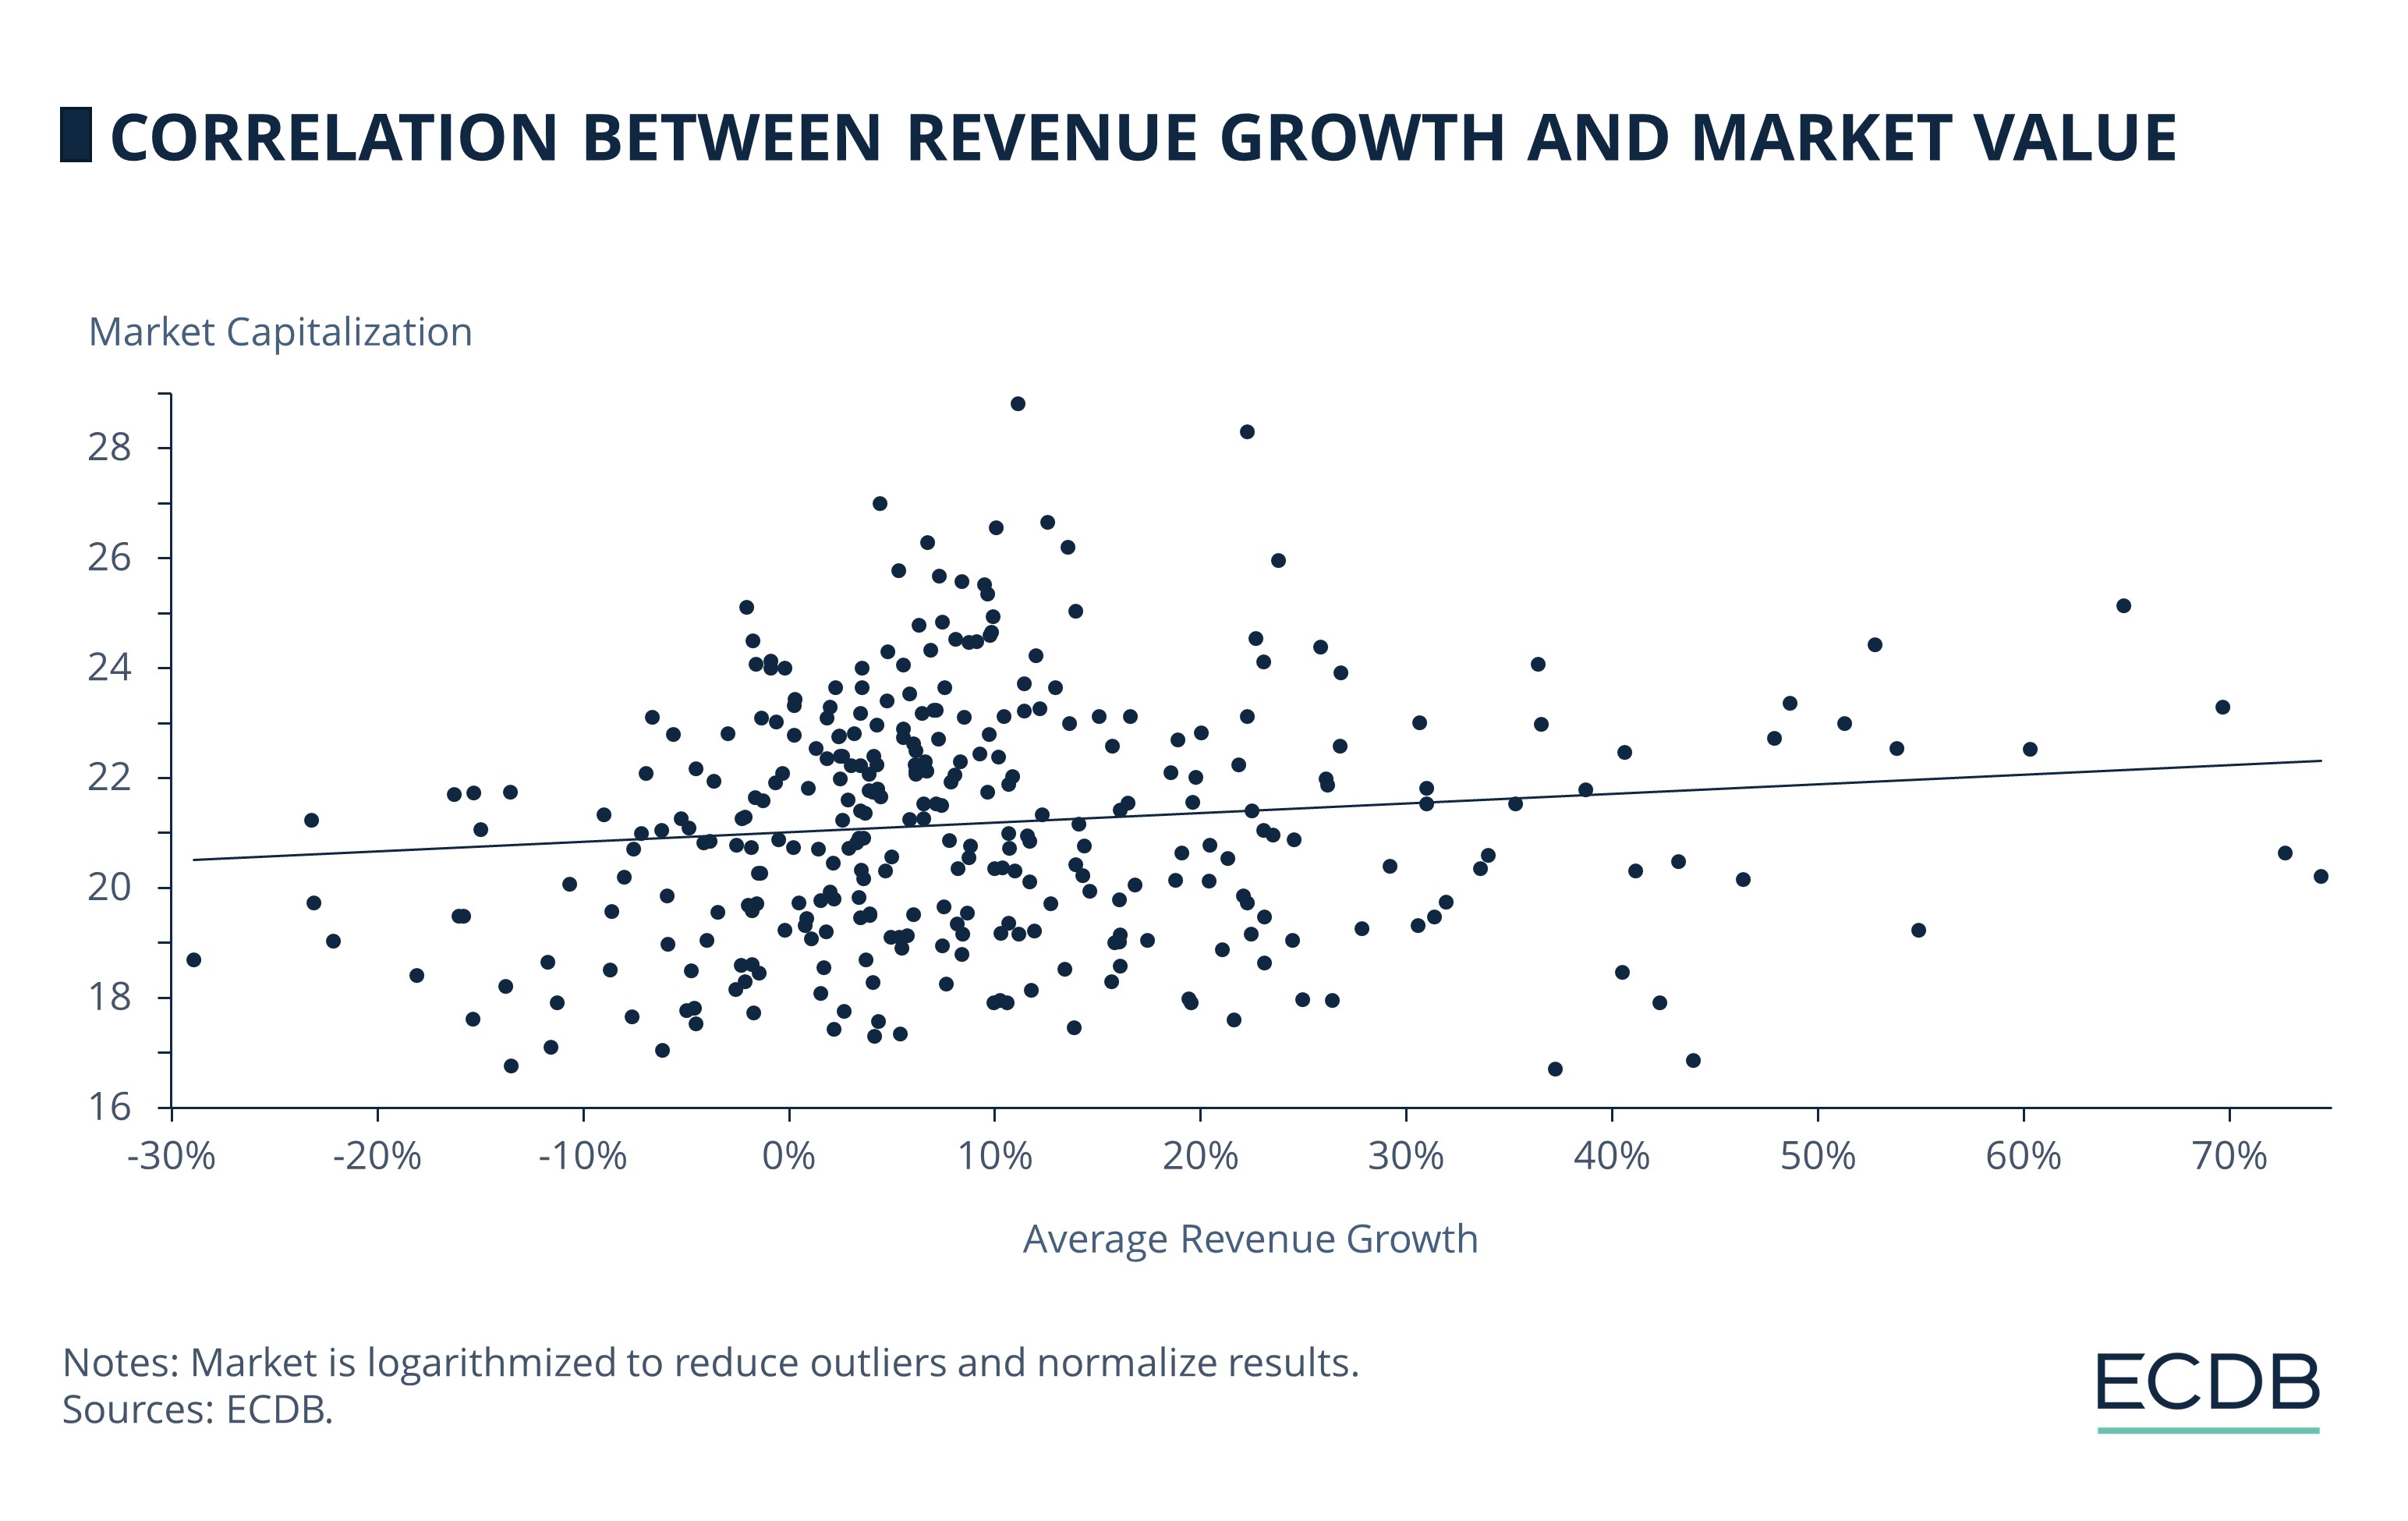 Correlation between Revenue Growth and Market Value